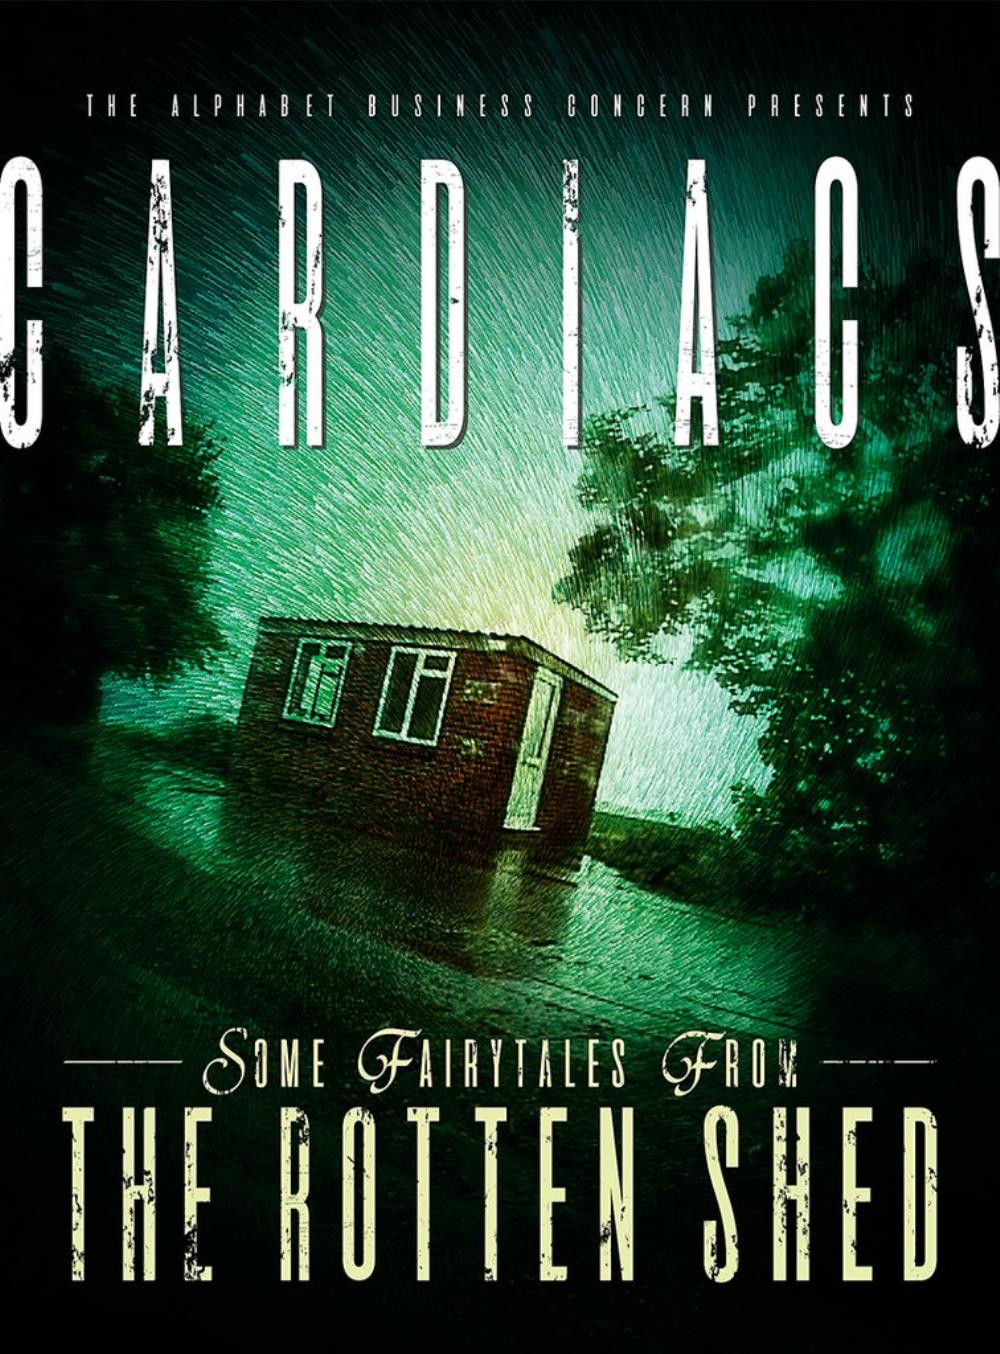 Cardiacs Some Fairytales From The Rotten Shed album cover